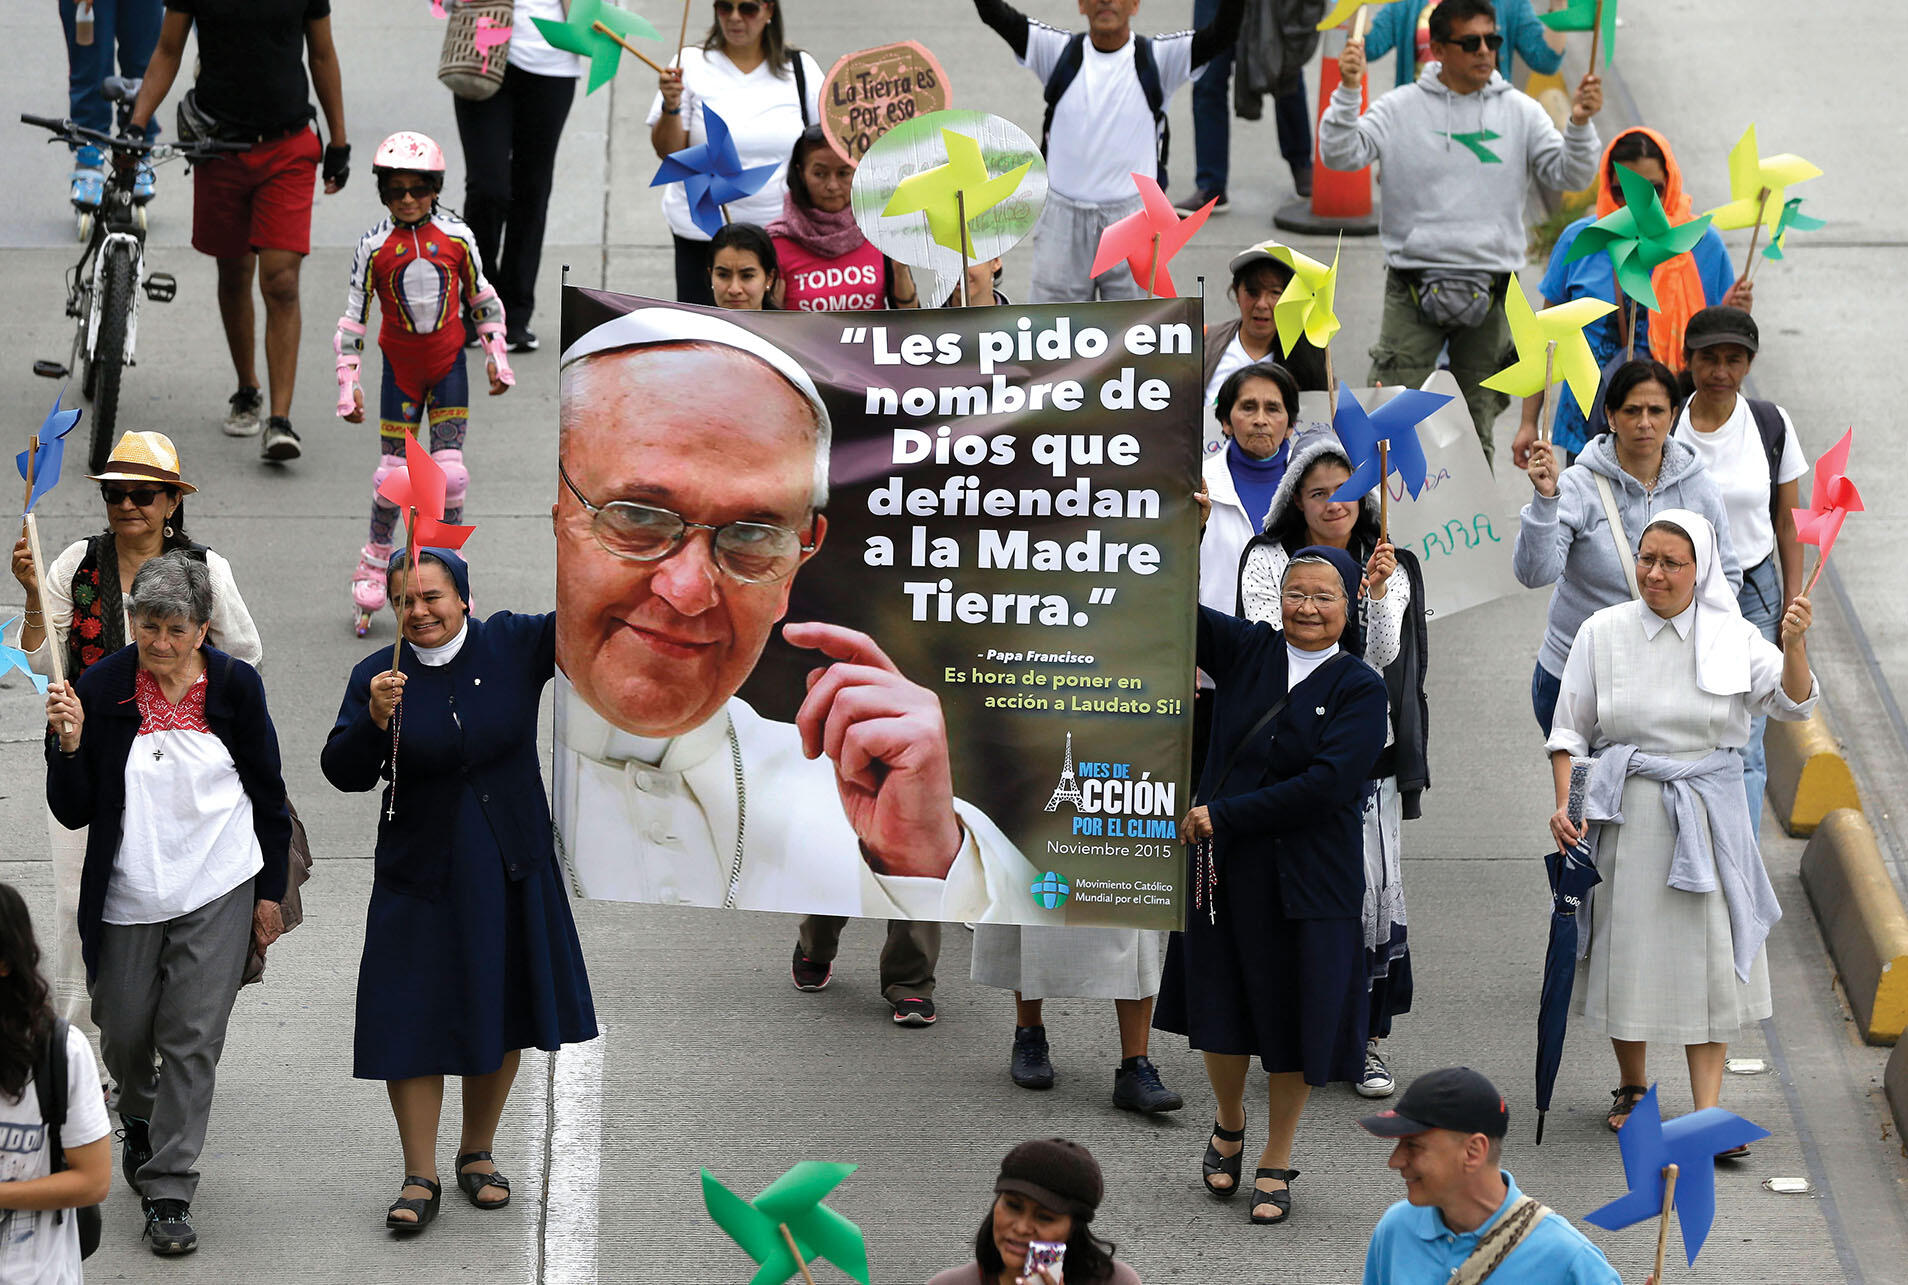   “I ask you in the name of God to defend Mother Earth.” (Photo by Fernando Vergara/AP Photo.)